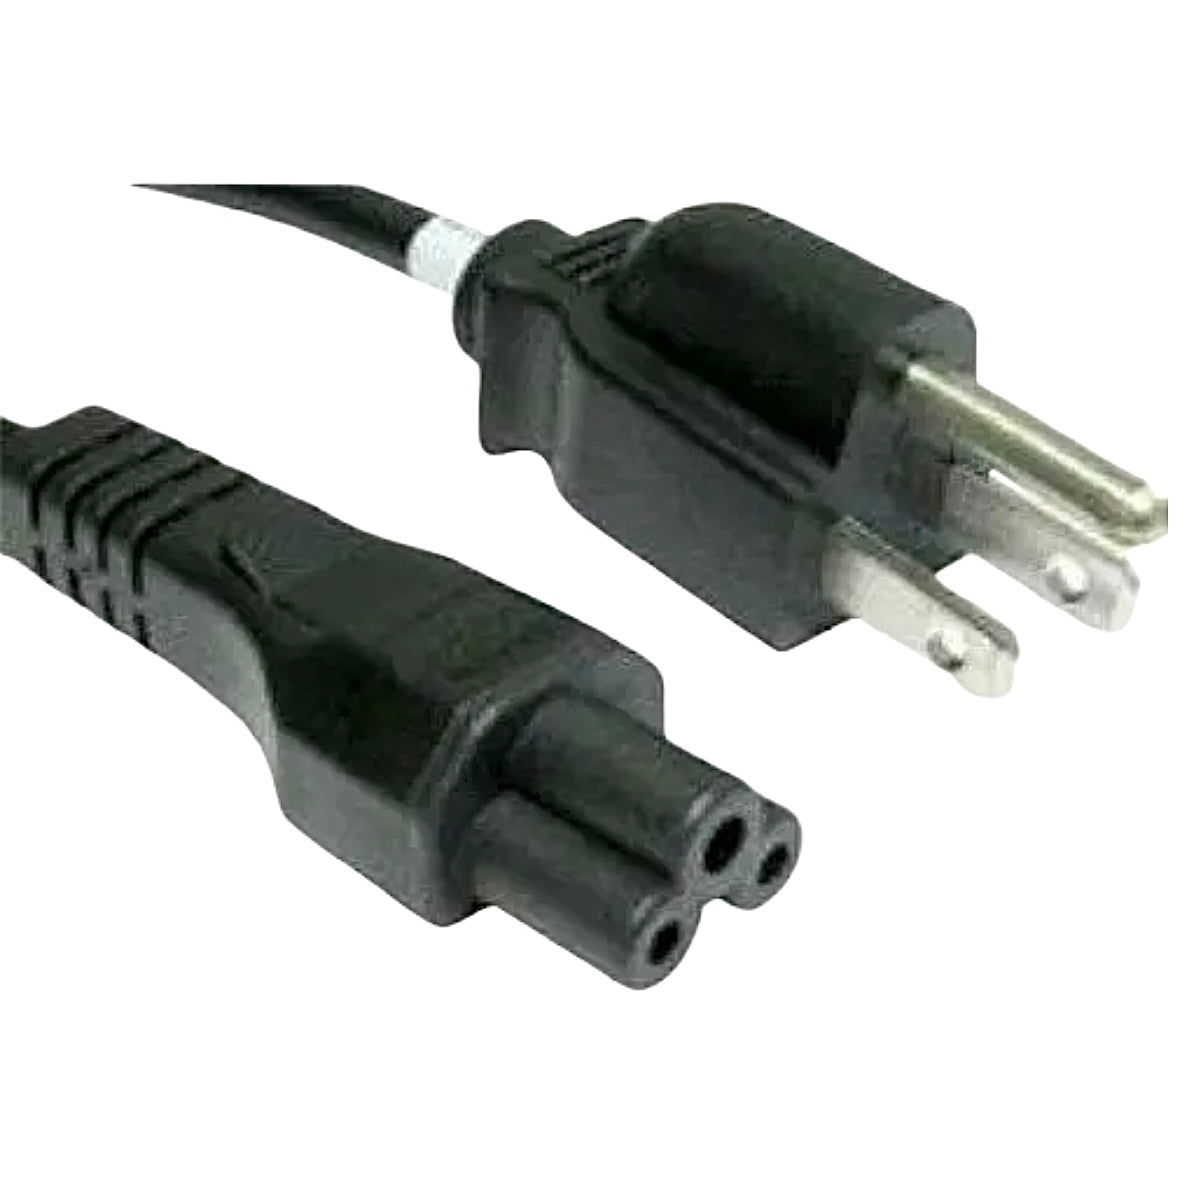 Power Cord 3 pin for PoE Injector- US